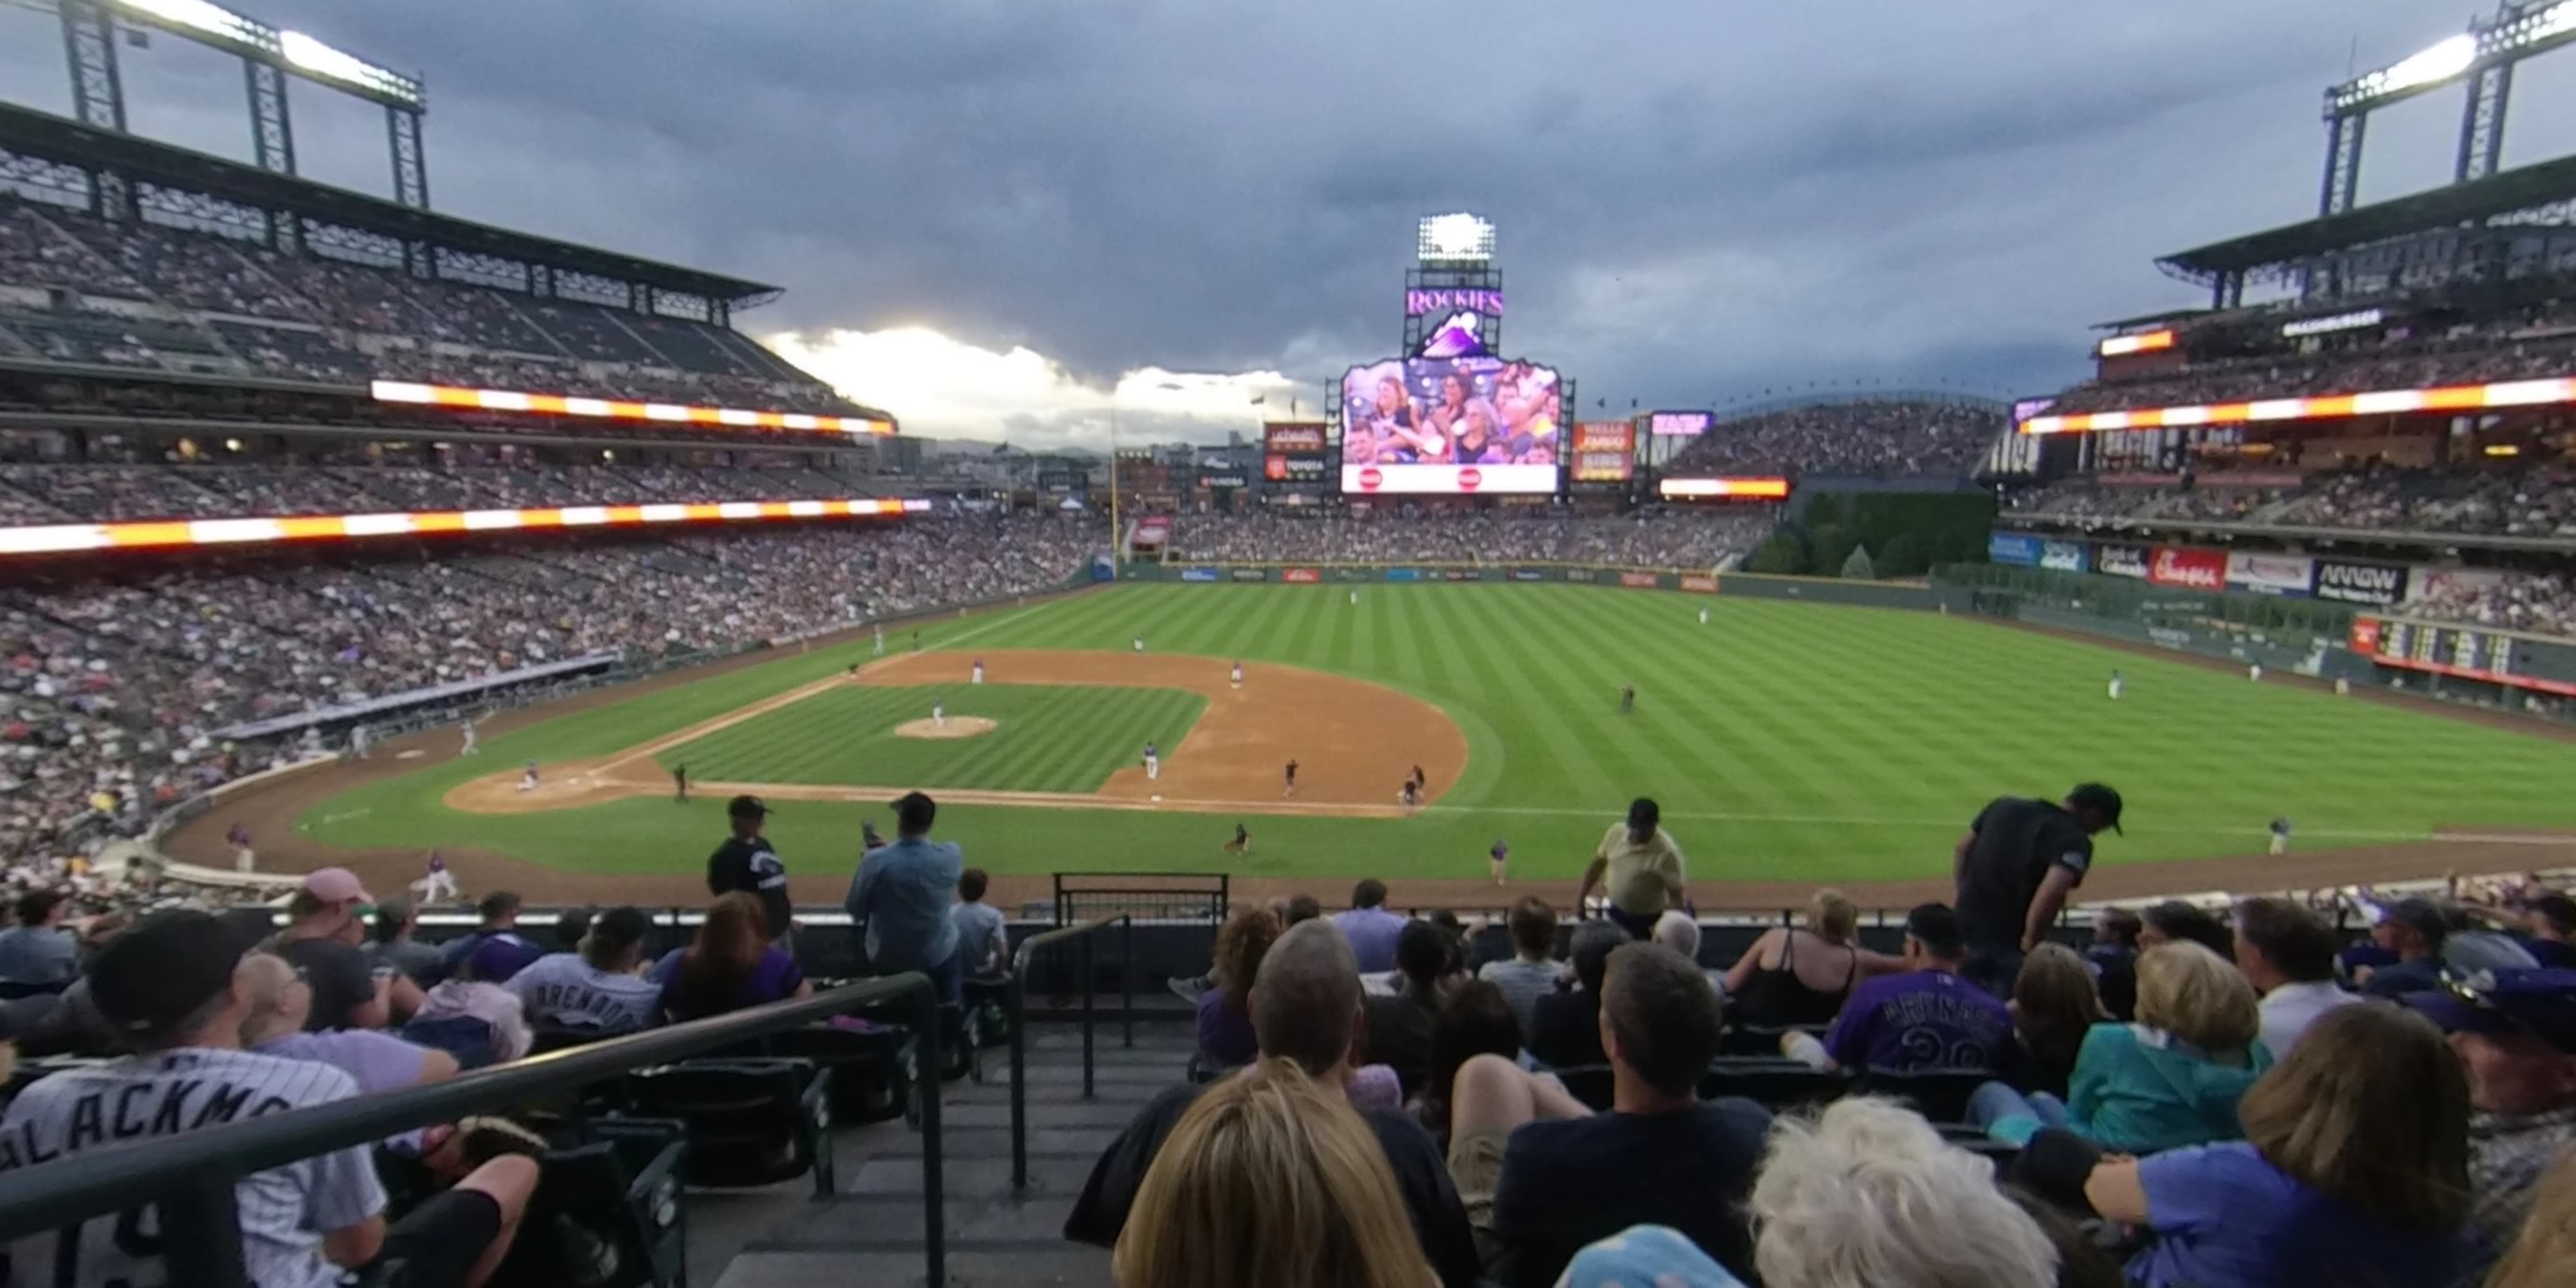 section 221 panoramic seat view  - coors field